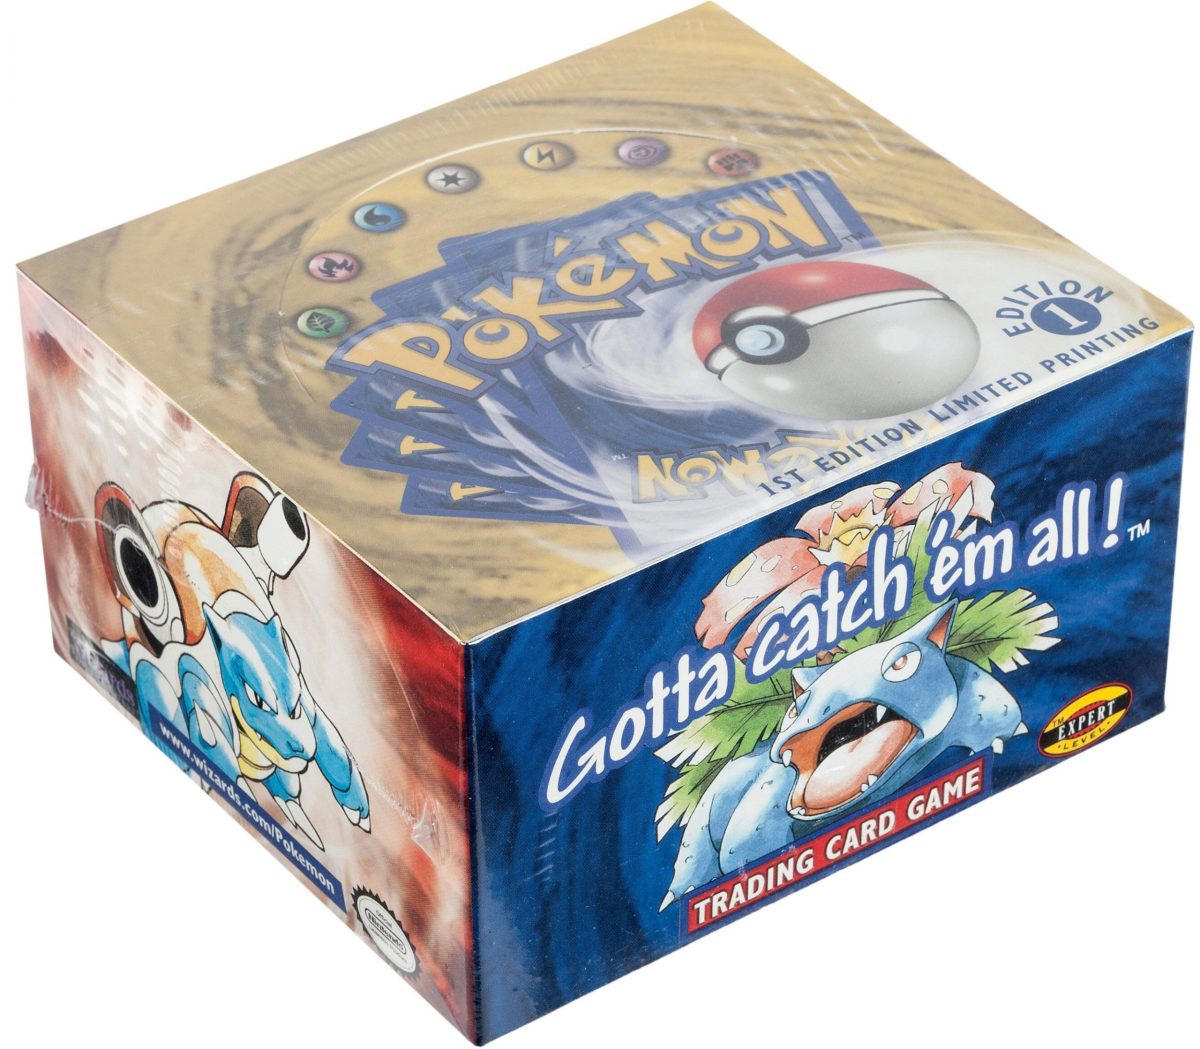 Is it better to invest in sealed Pokémon products or individual cards?